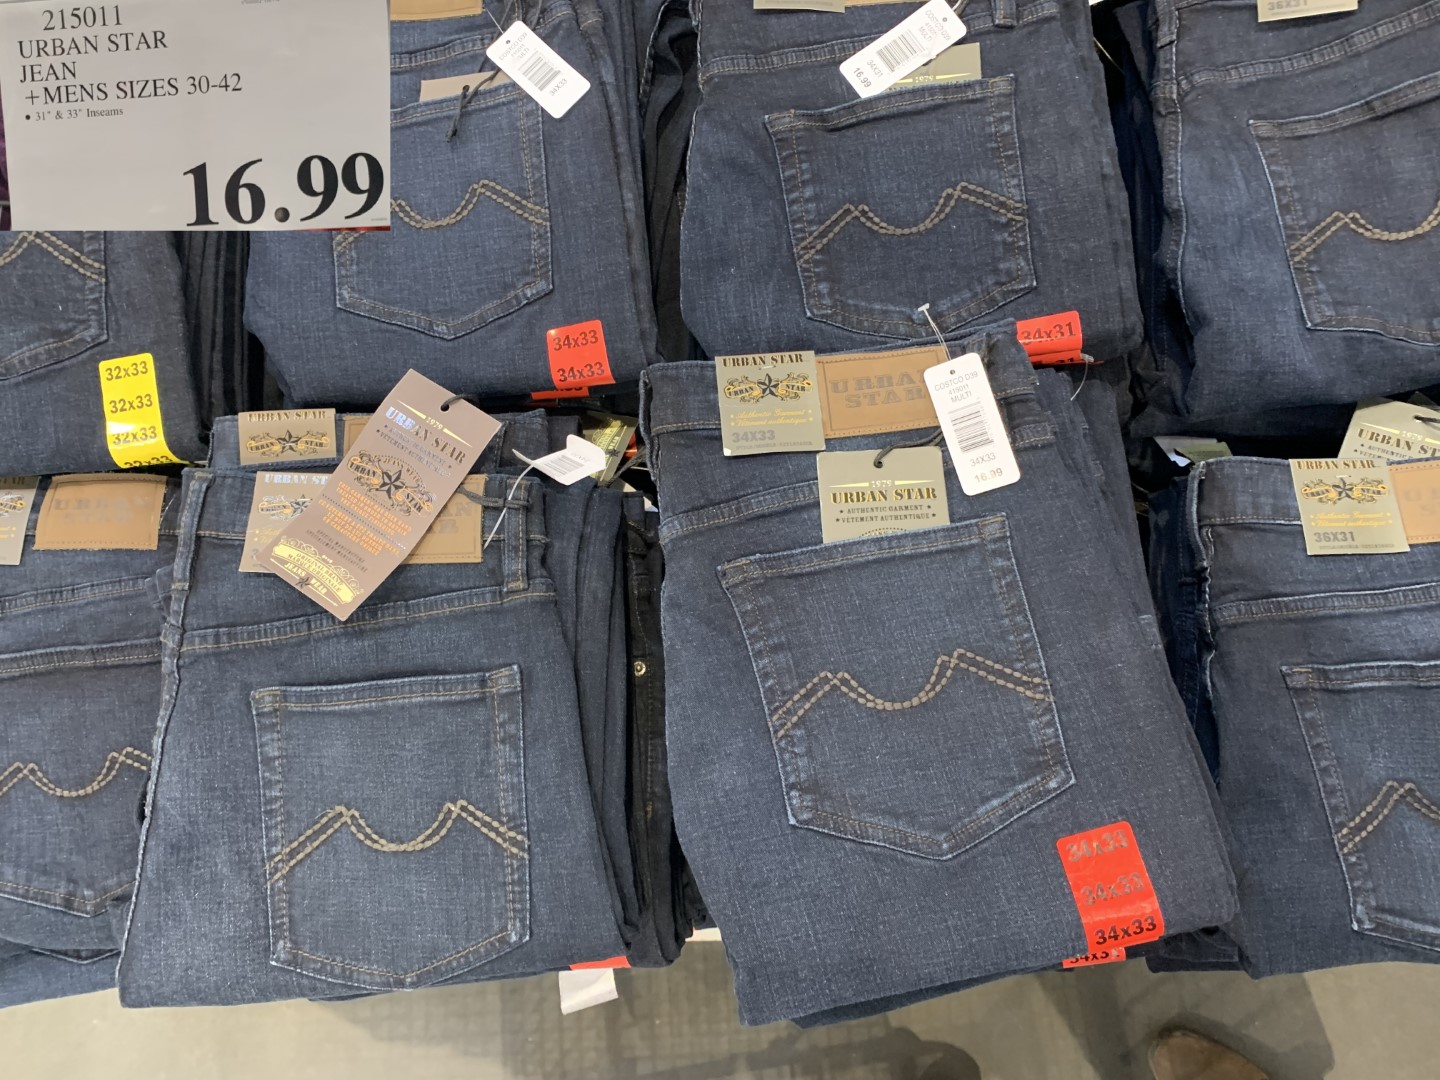 Costco Winter Aisle 2020 Superpost! Spring Clothing - Costco West Fan Blog